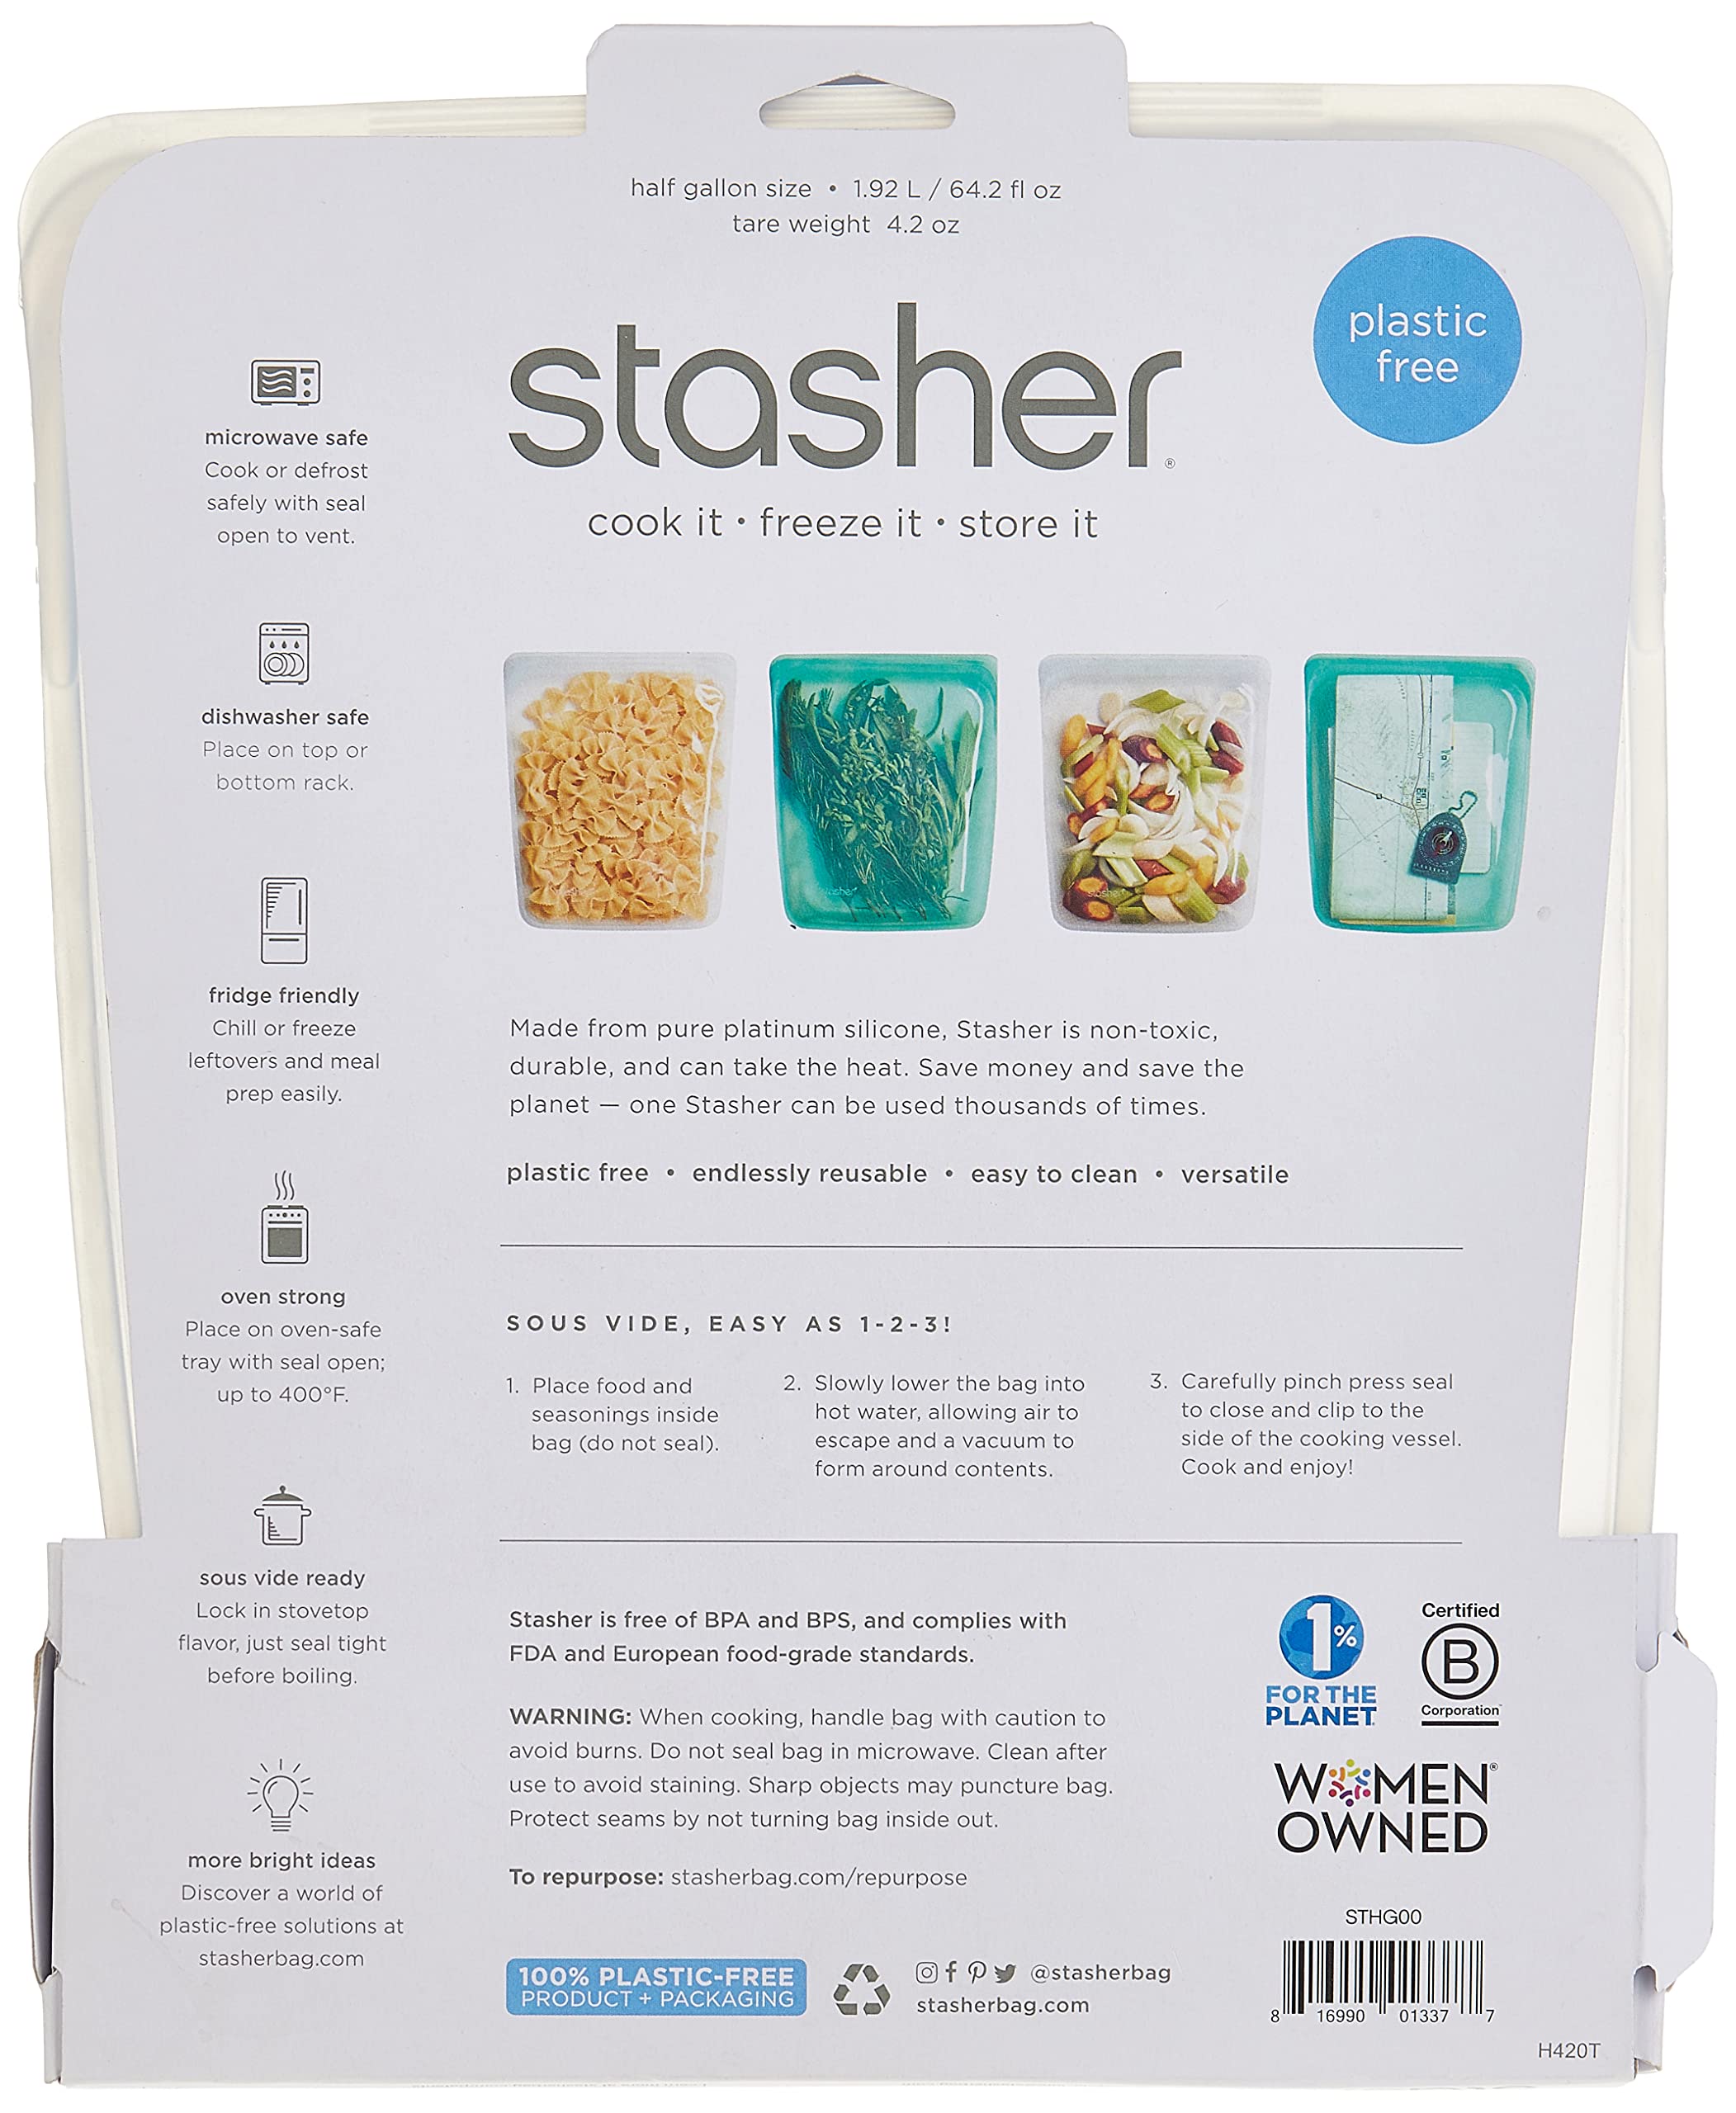 Stasher Reusable Silicone Storage Bag, Food Storage Container, Microwave and Dishwasher Safe, Leak-free, 1/2 Gallon, Clear